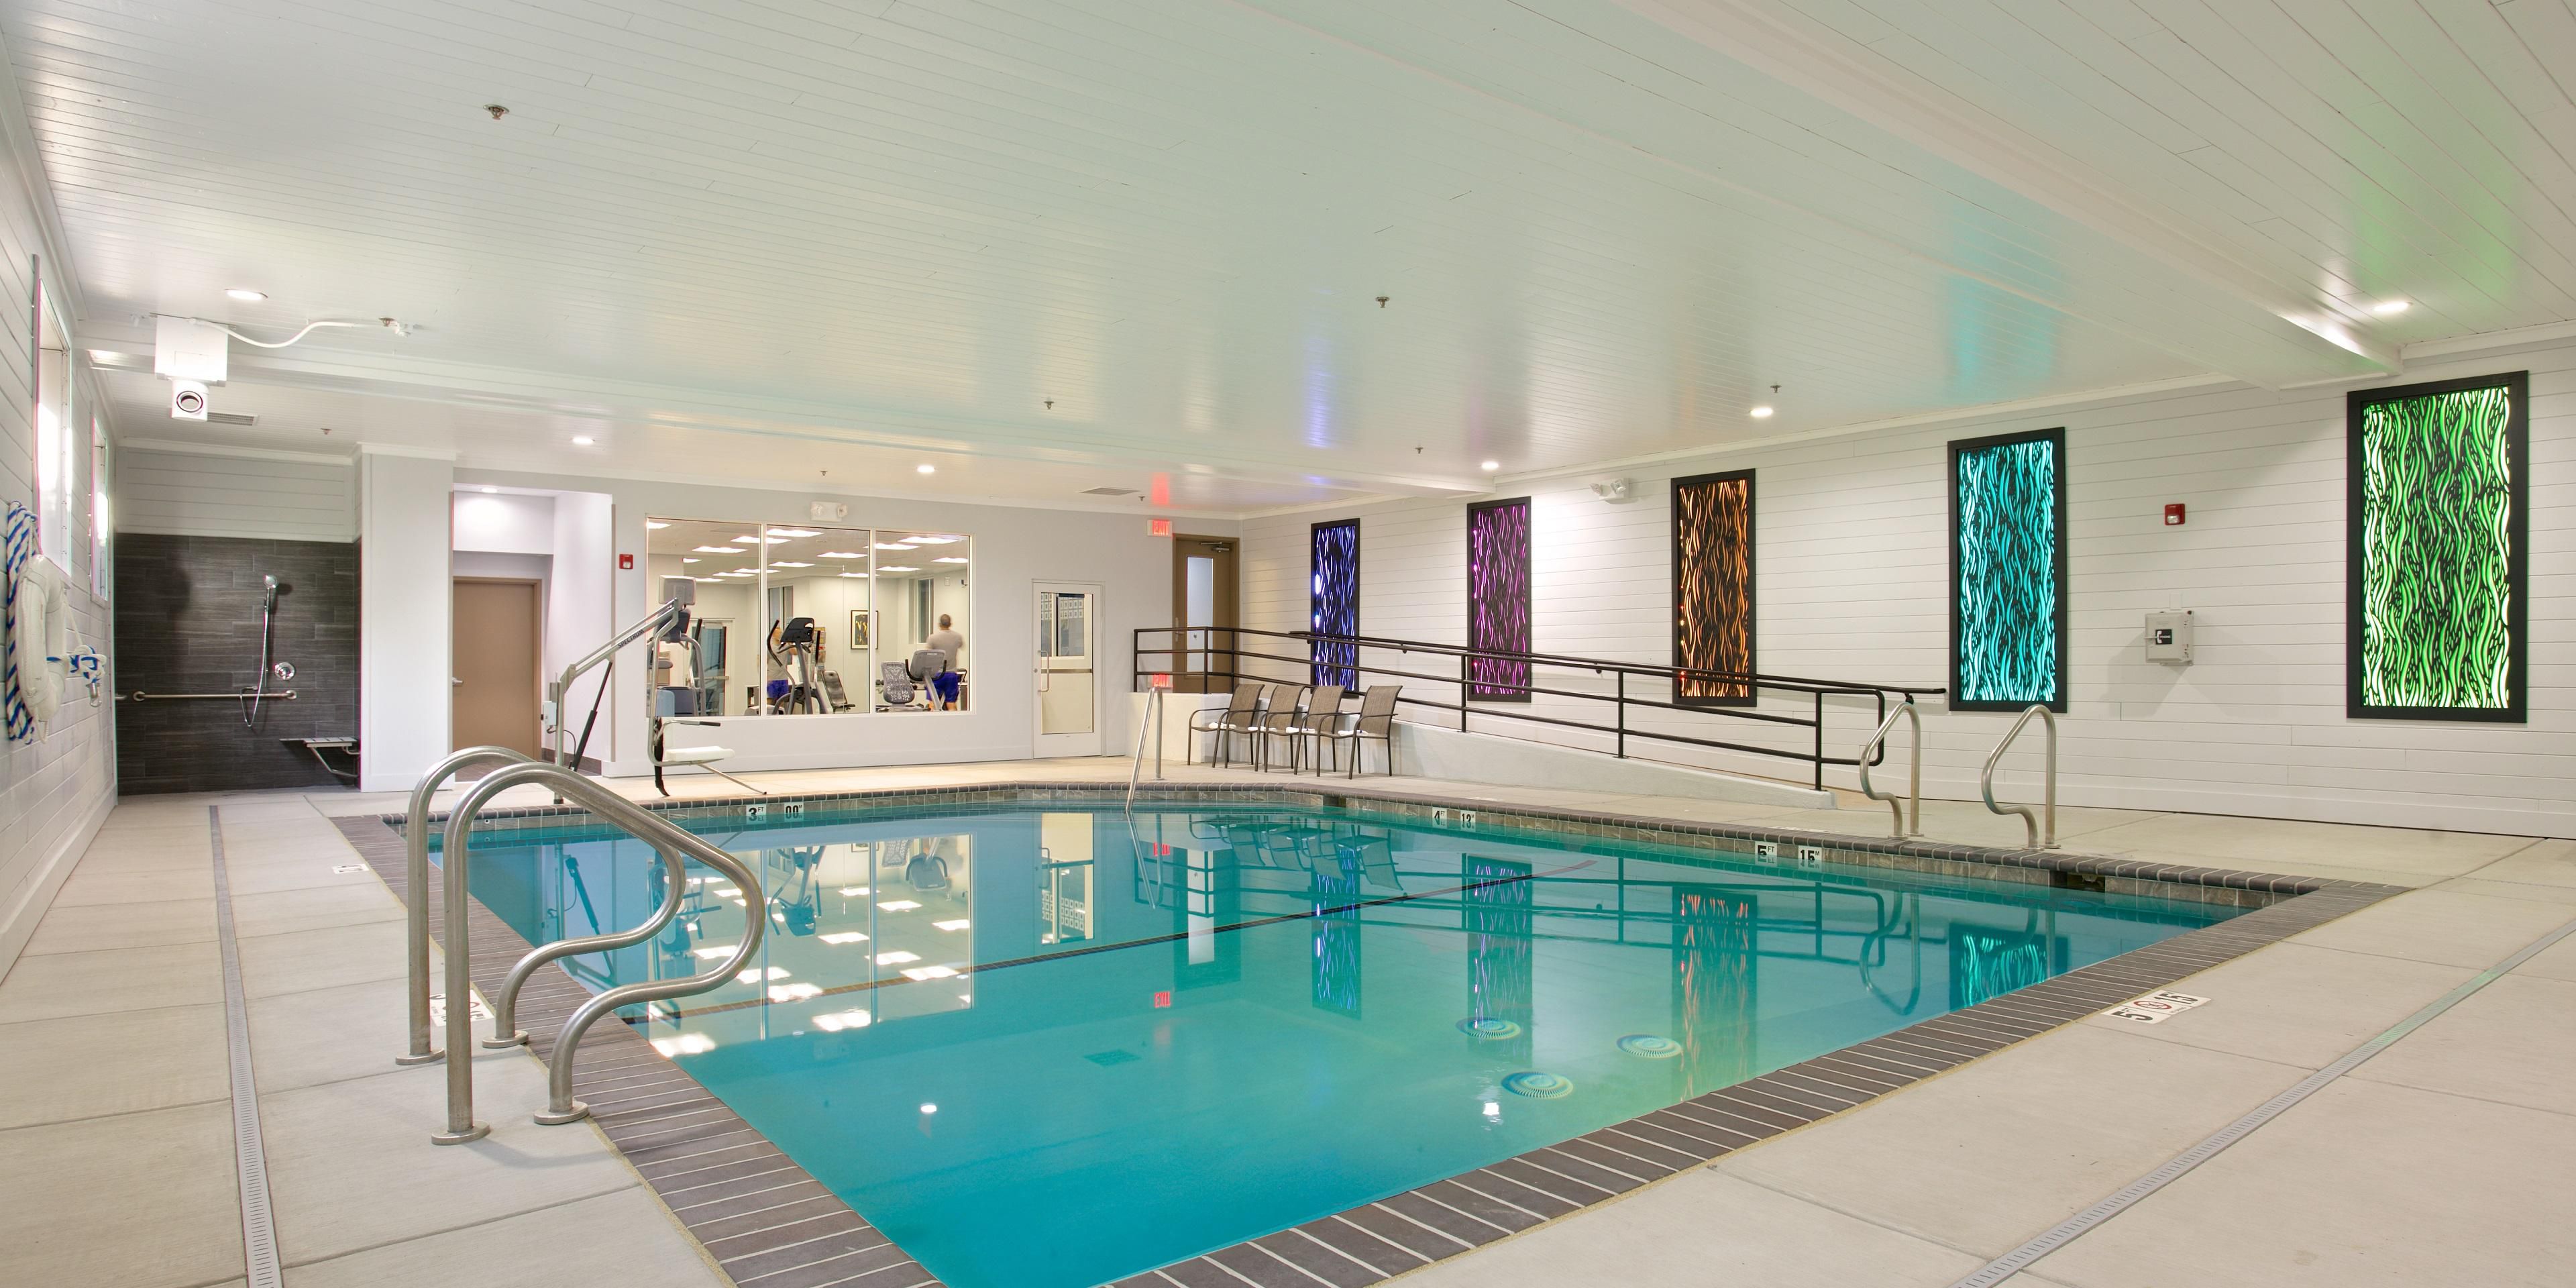 Take a dip in our indoor swimming pool available for your enjoyment.